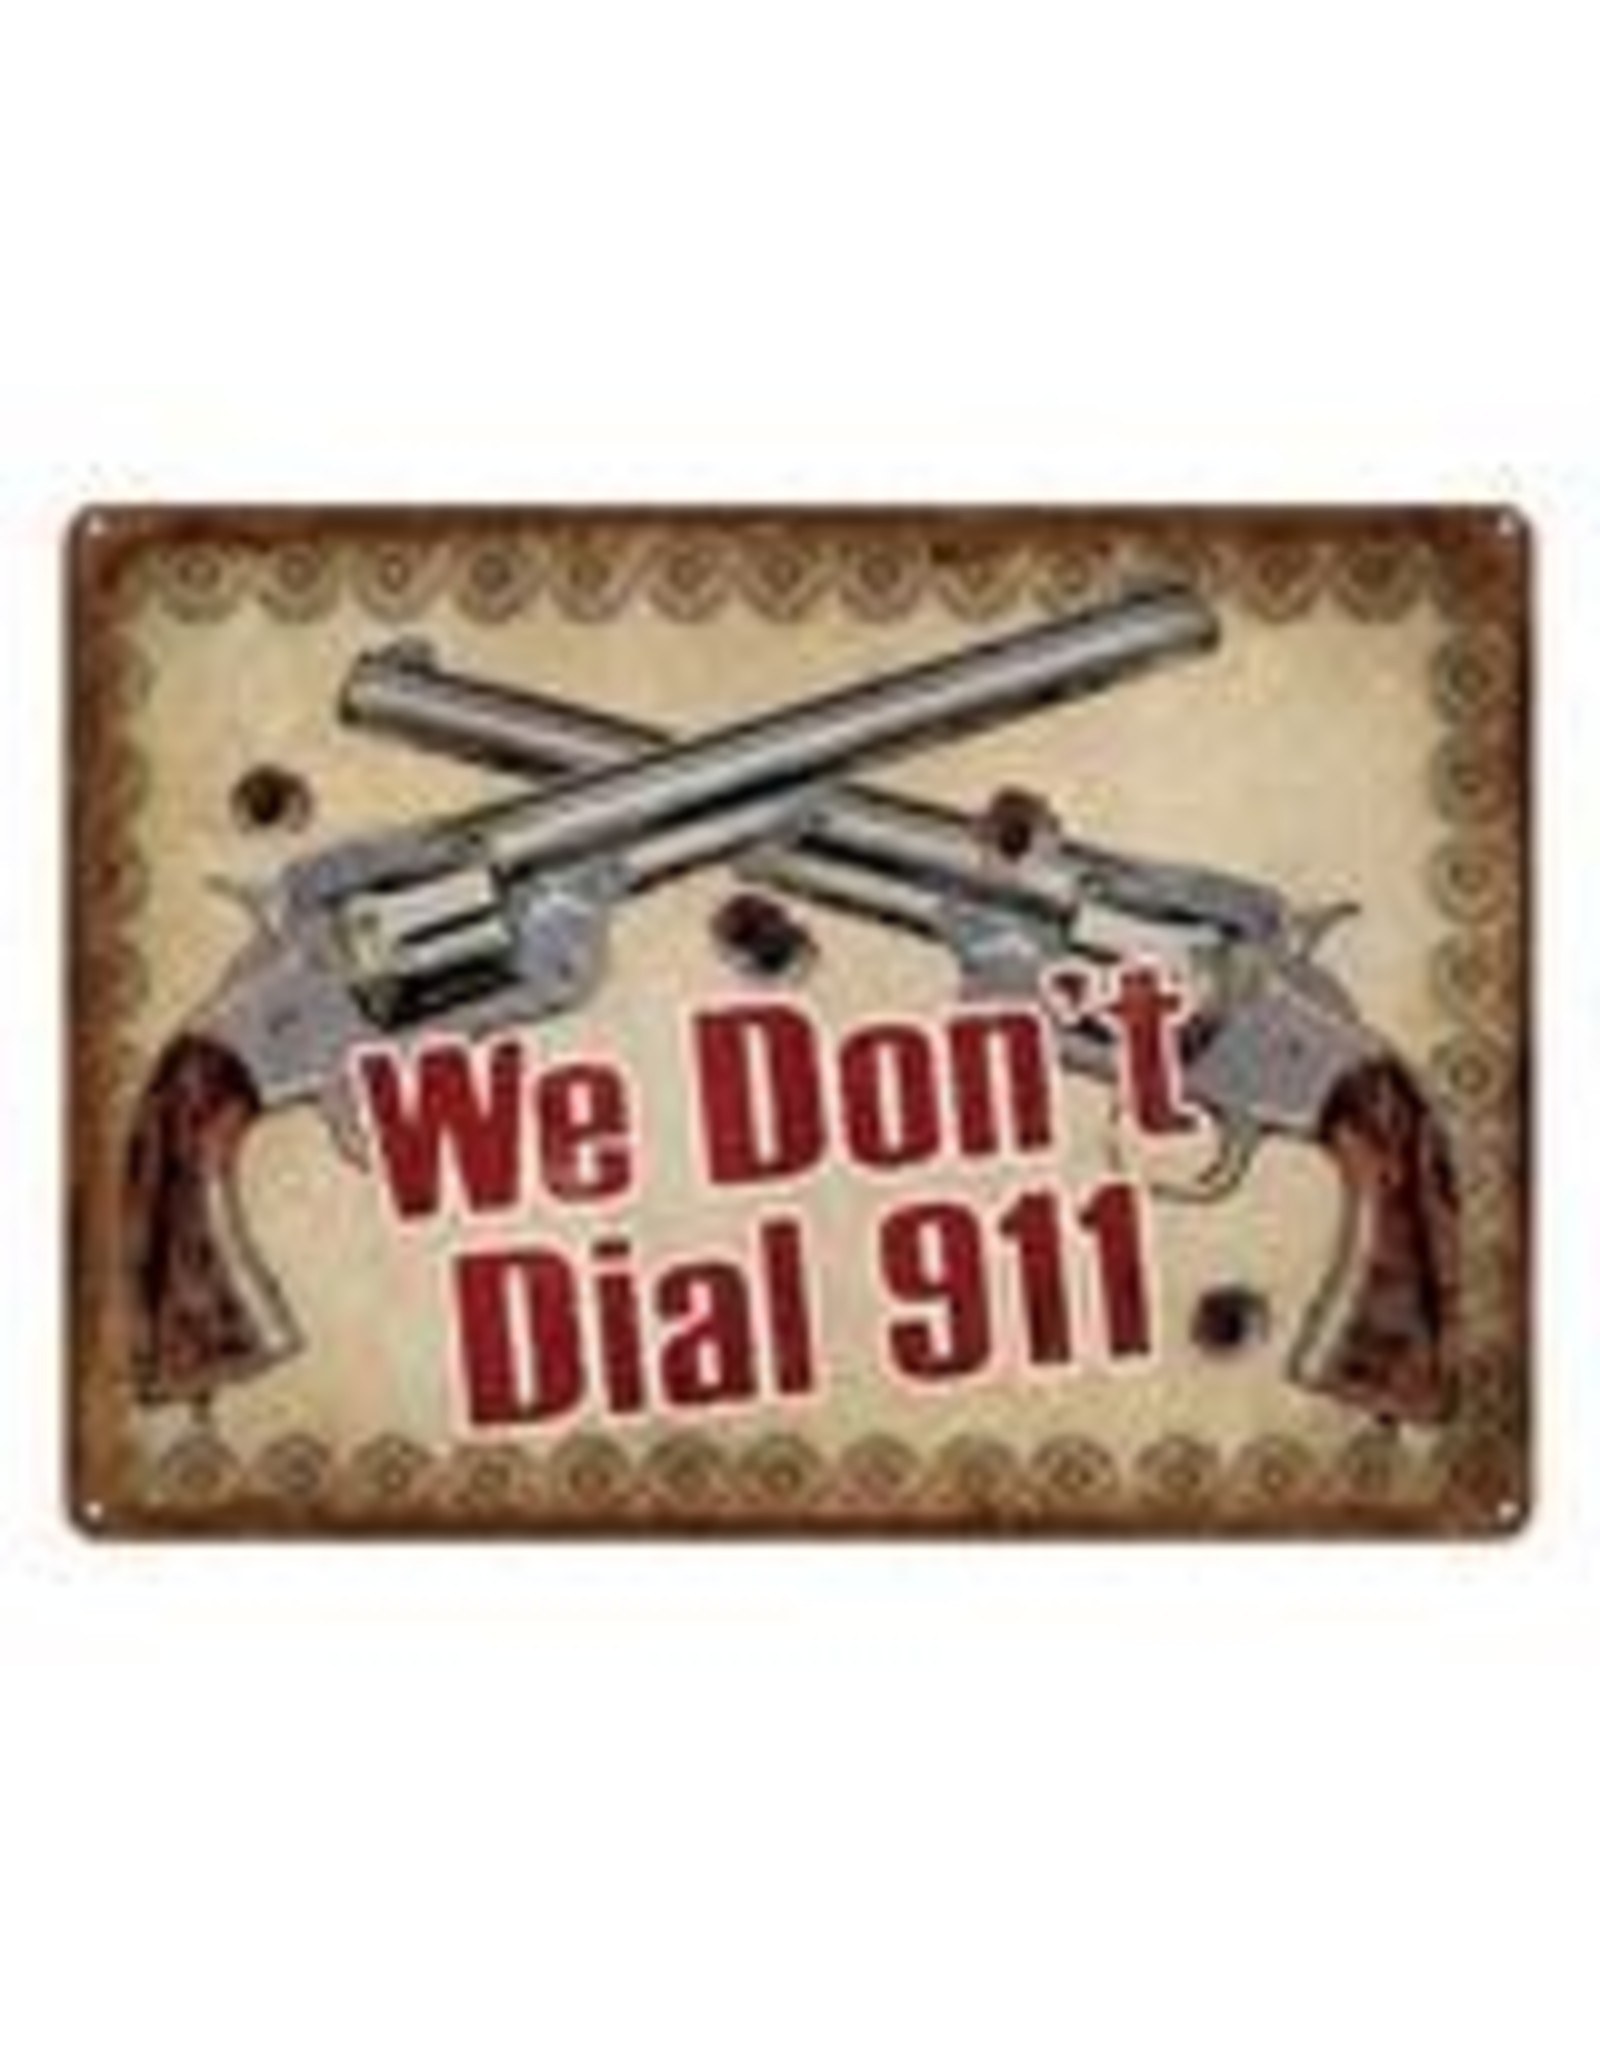 Rivers Edge Products Tin Sign 17in x 12in - We Don't Dial 911